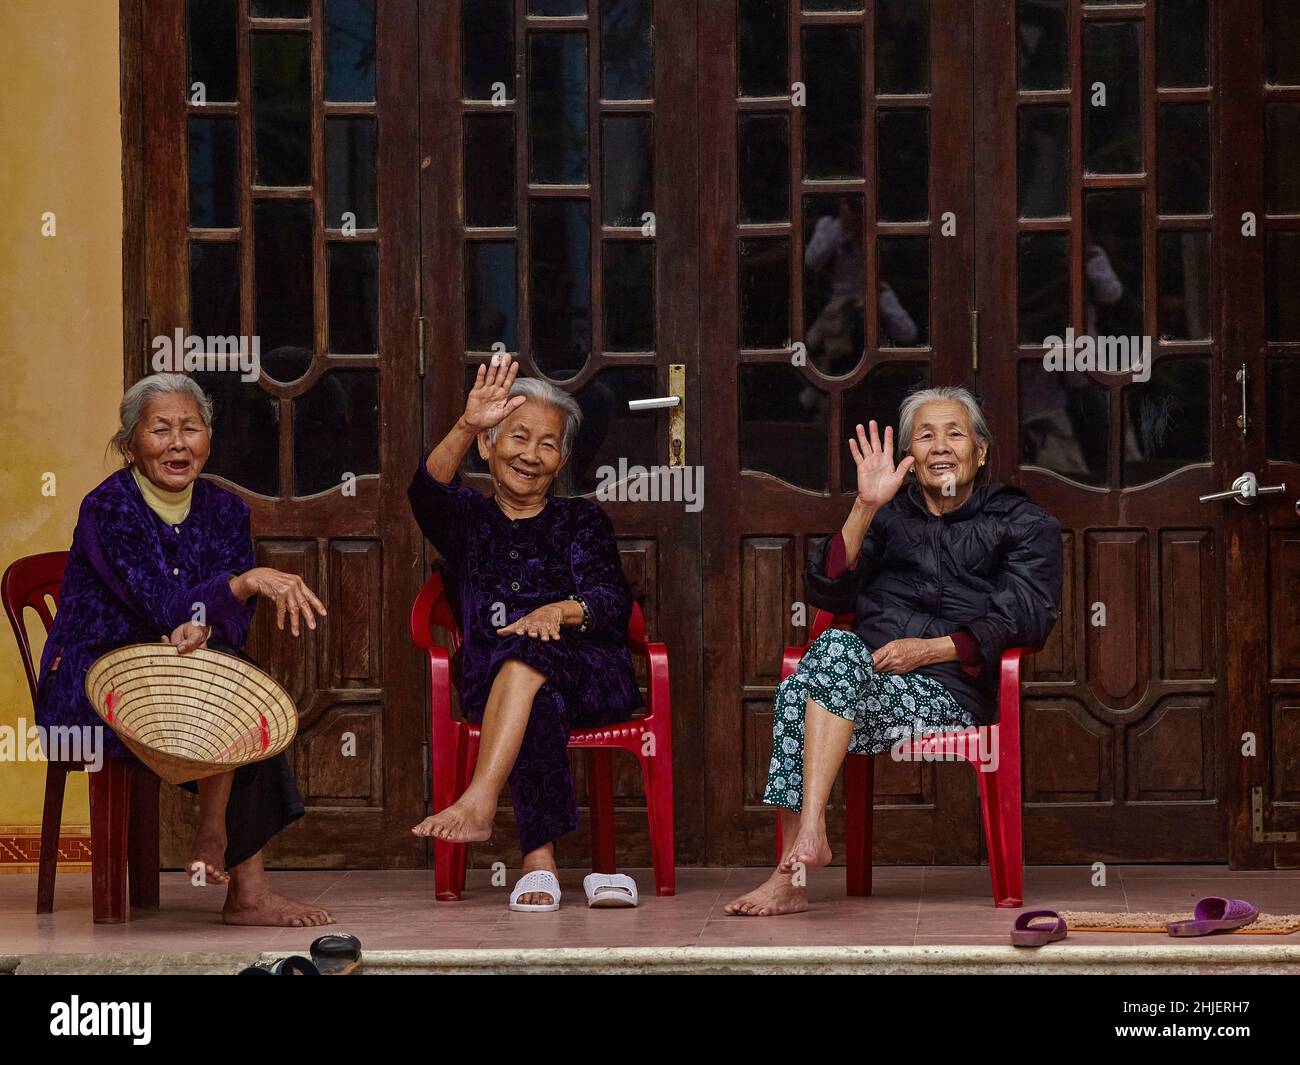 Three elderly Vietnamese women sit on chairs in front of the house. The women smile and greet with a raised hands sincerely. Wood carving doors. Stock Photo